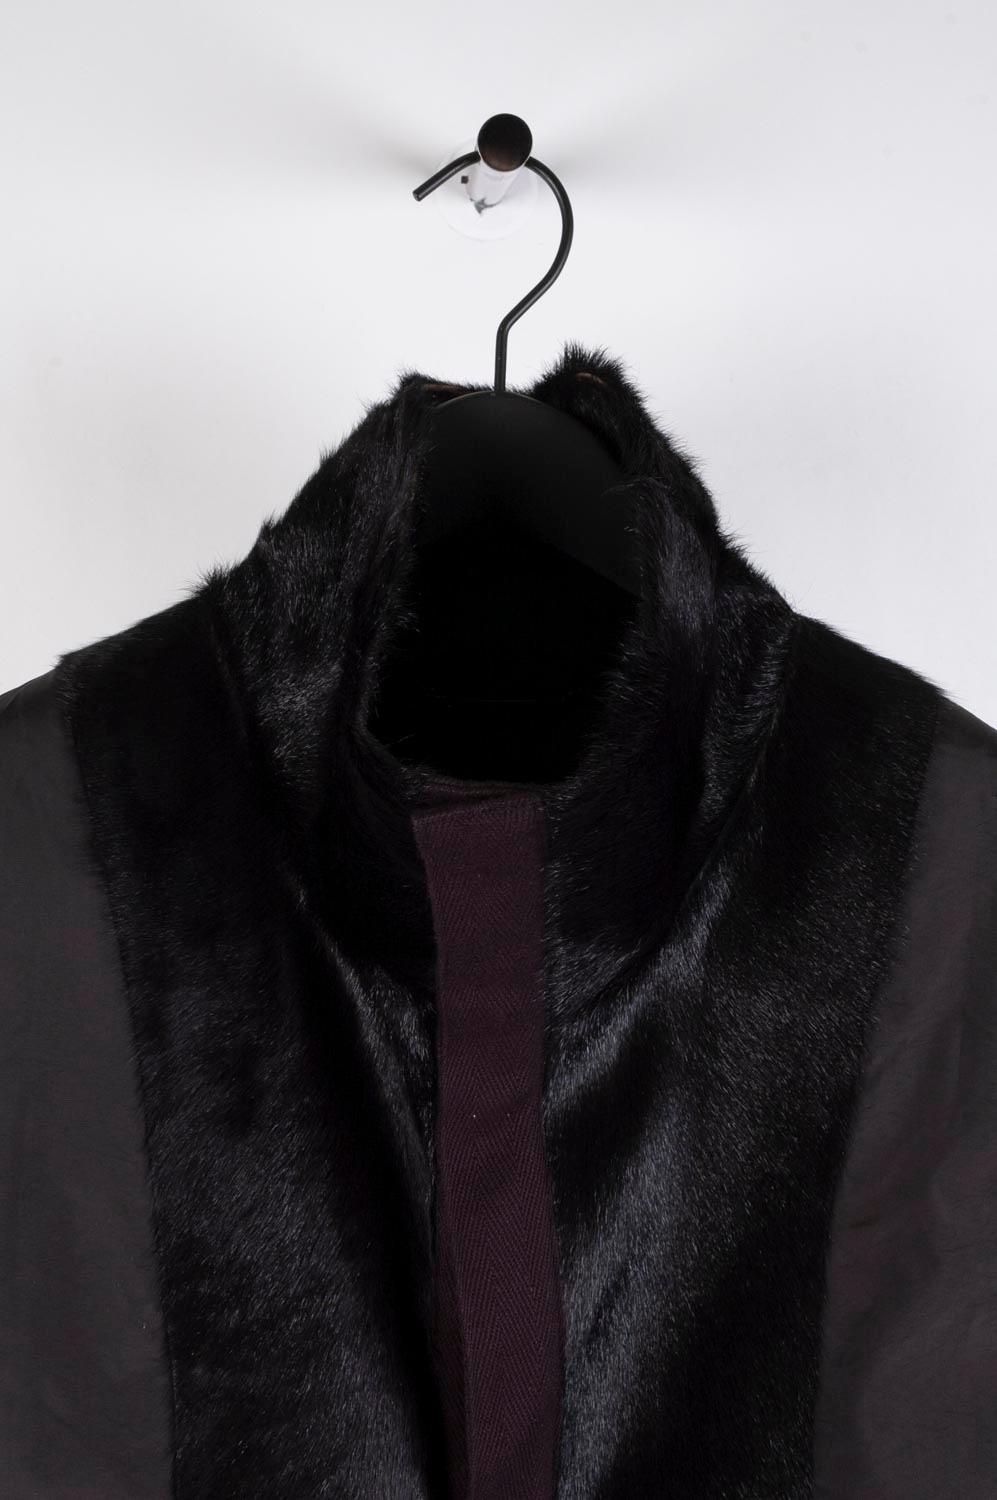 Item for sale is 100% genuine Dolce&Gabbana Fur Men Minimalistic Vest, S432
Color: Black
(An actual color may a bit vary due to individual computer screen interpretation)
Material: 60% KID, 28% nylon, 12% polyester
Tag size: 50ITA, Medium
This vest